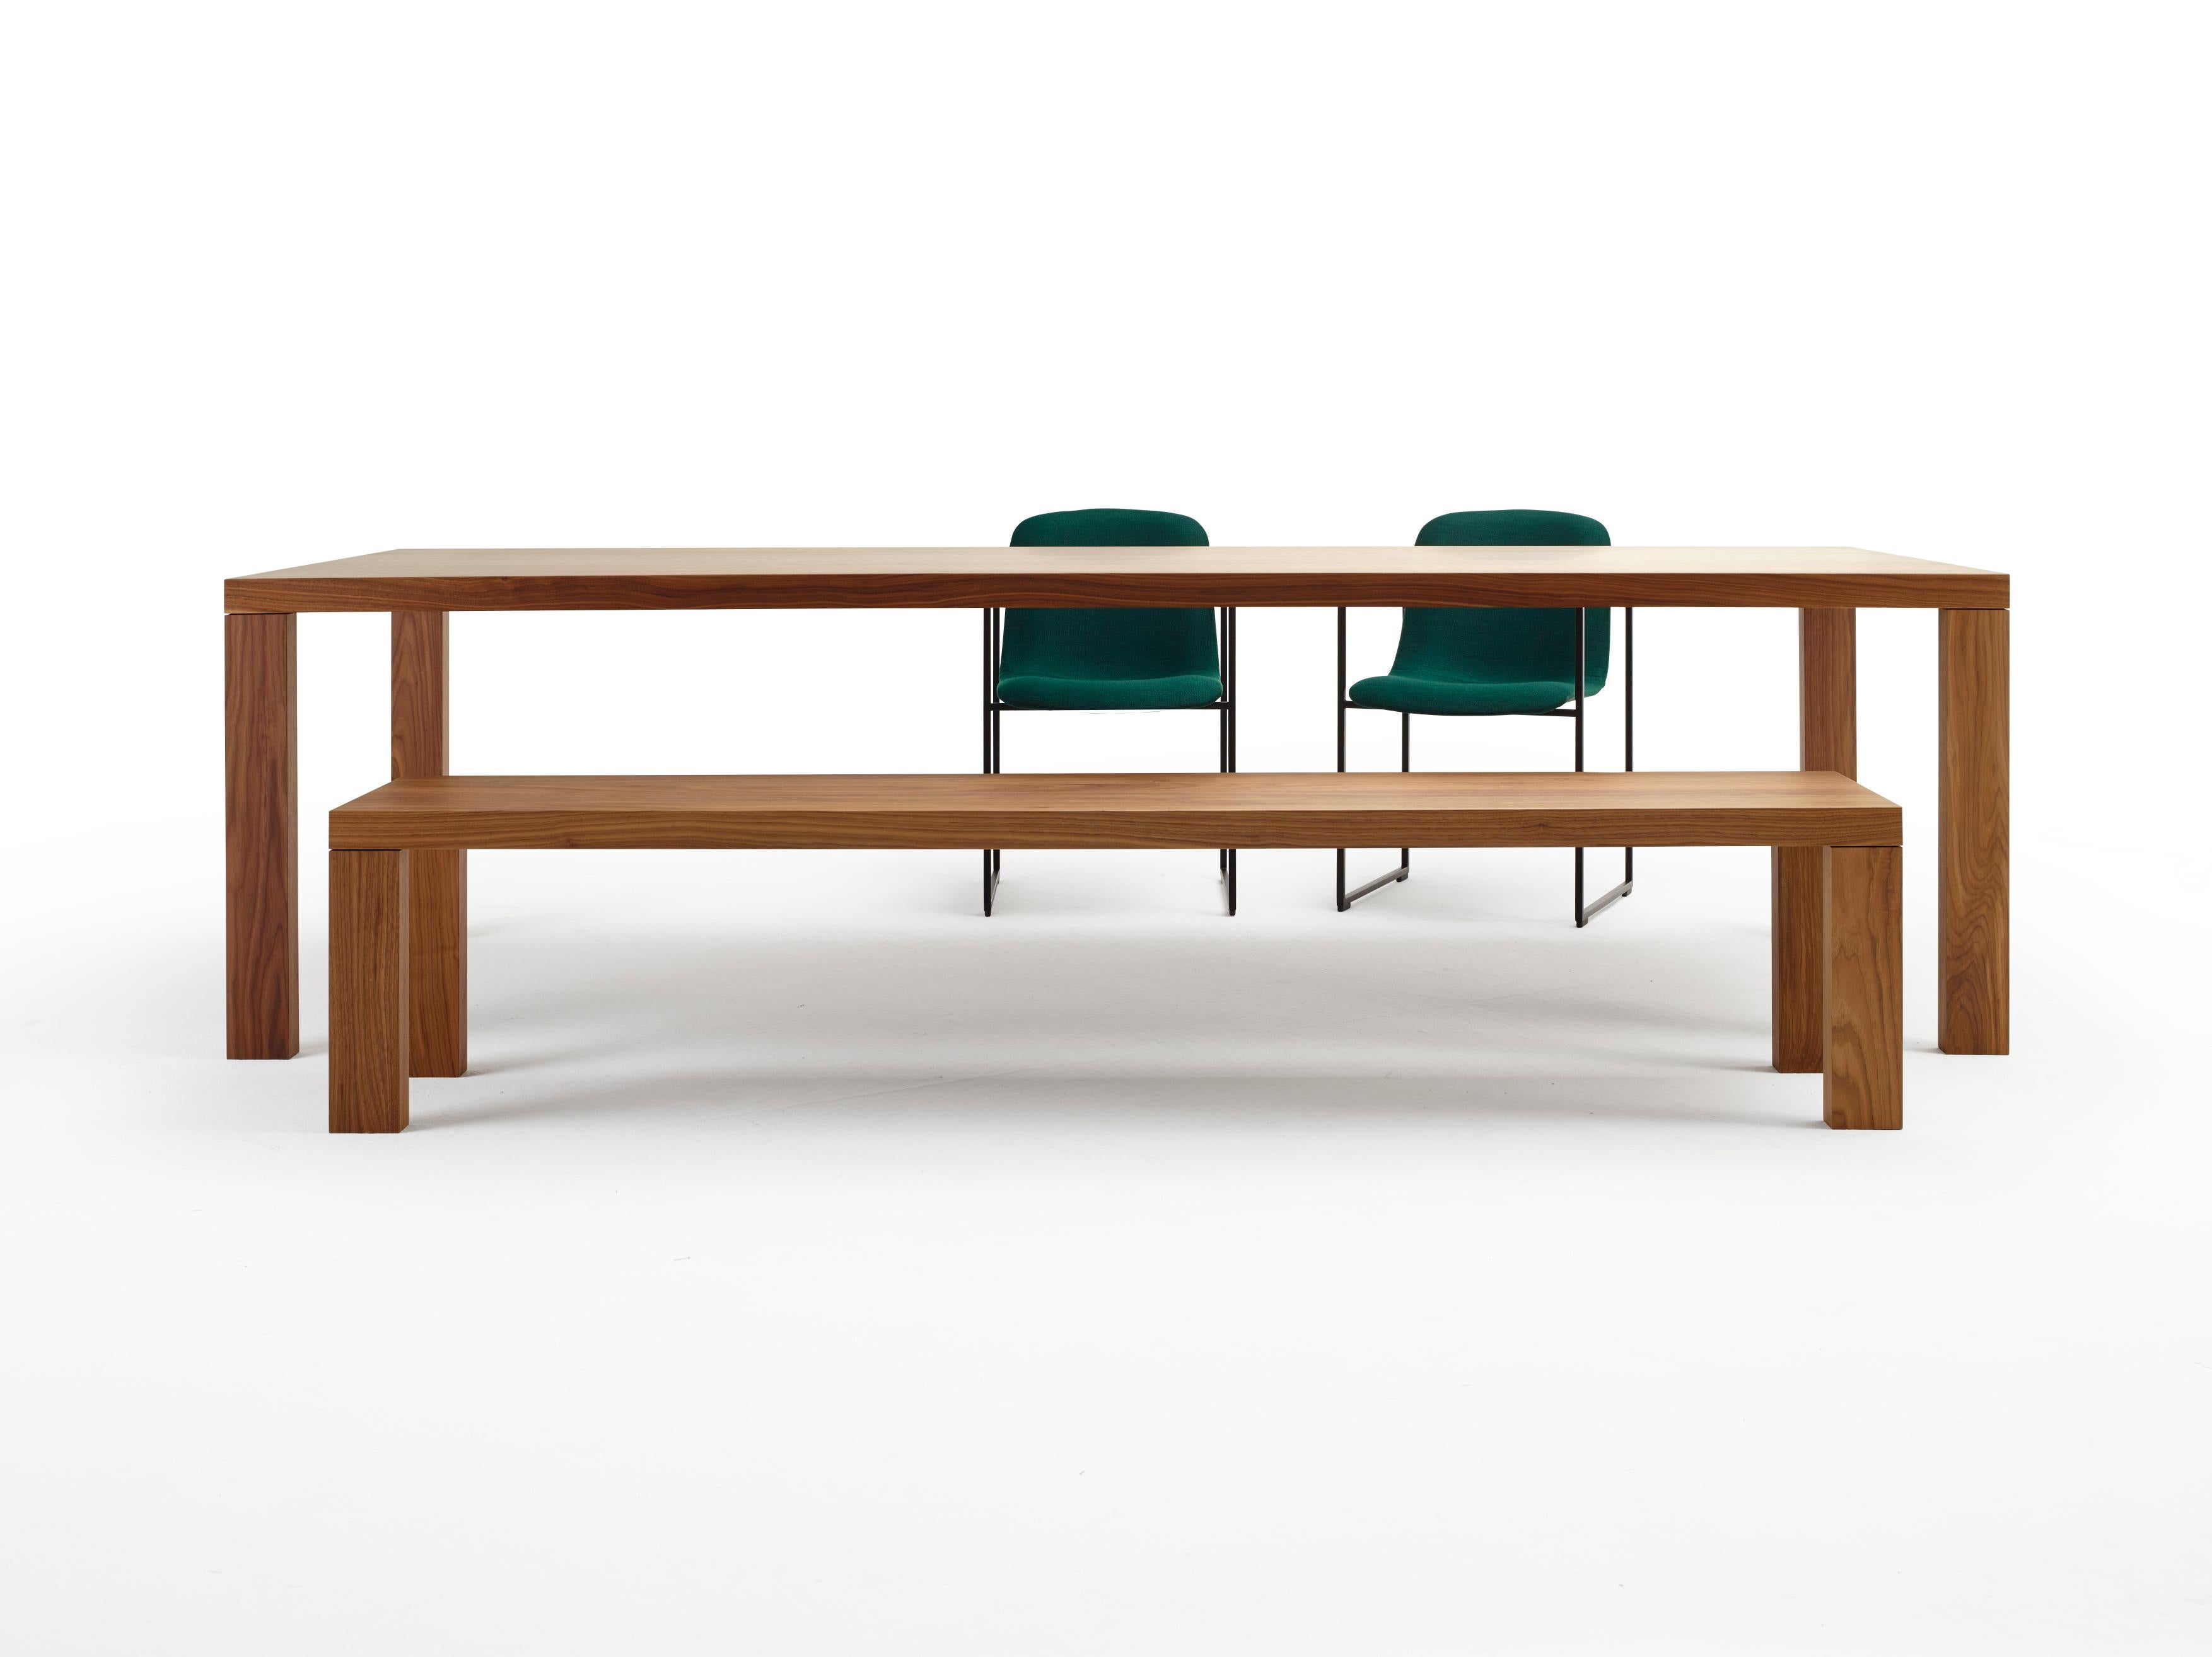 A solid wooden bench to complement the elegant Essenza table. Available in oak as well as in walnut.